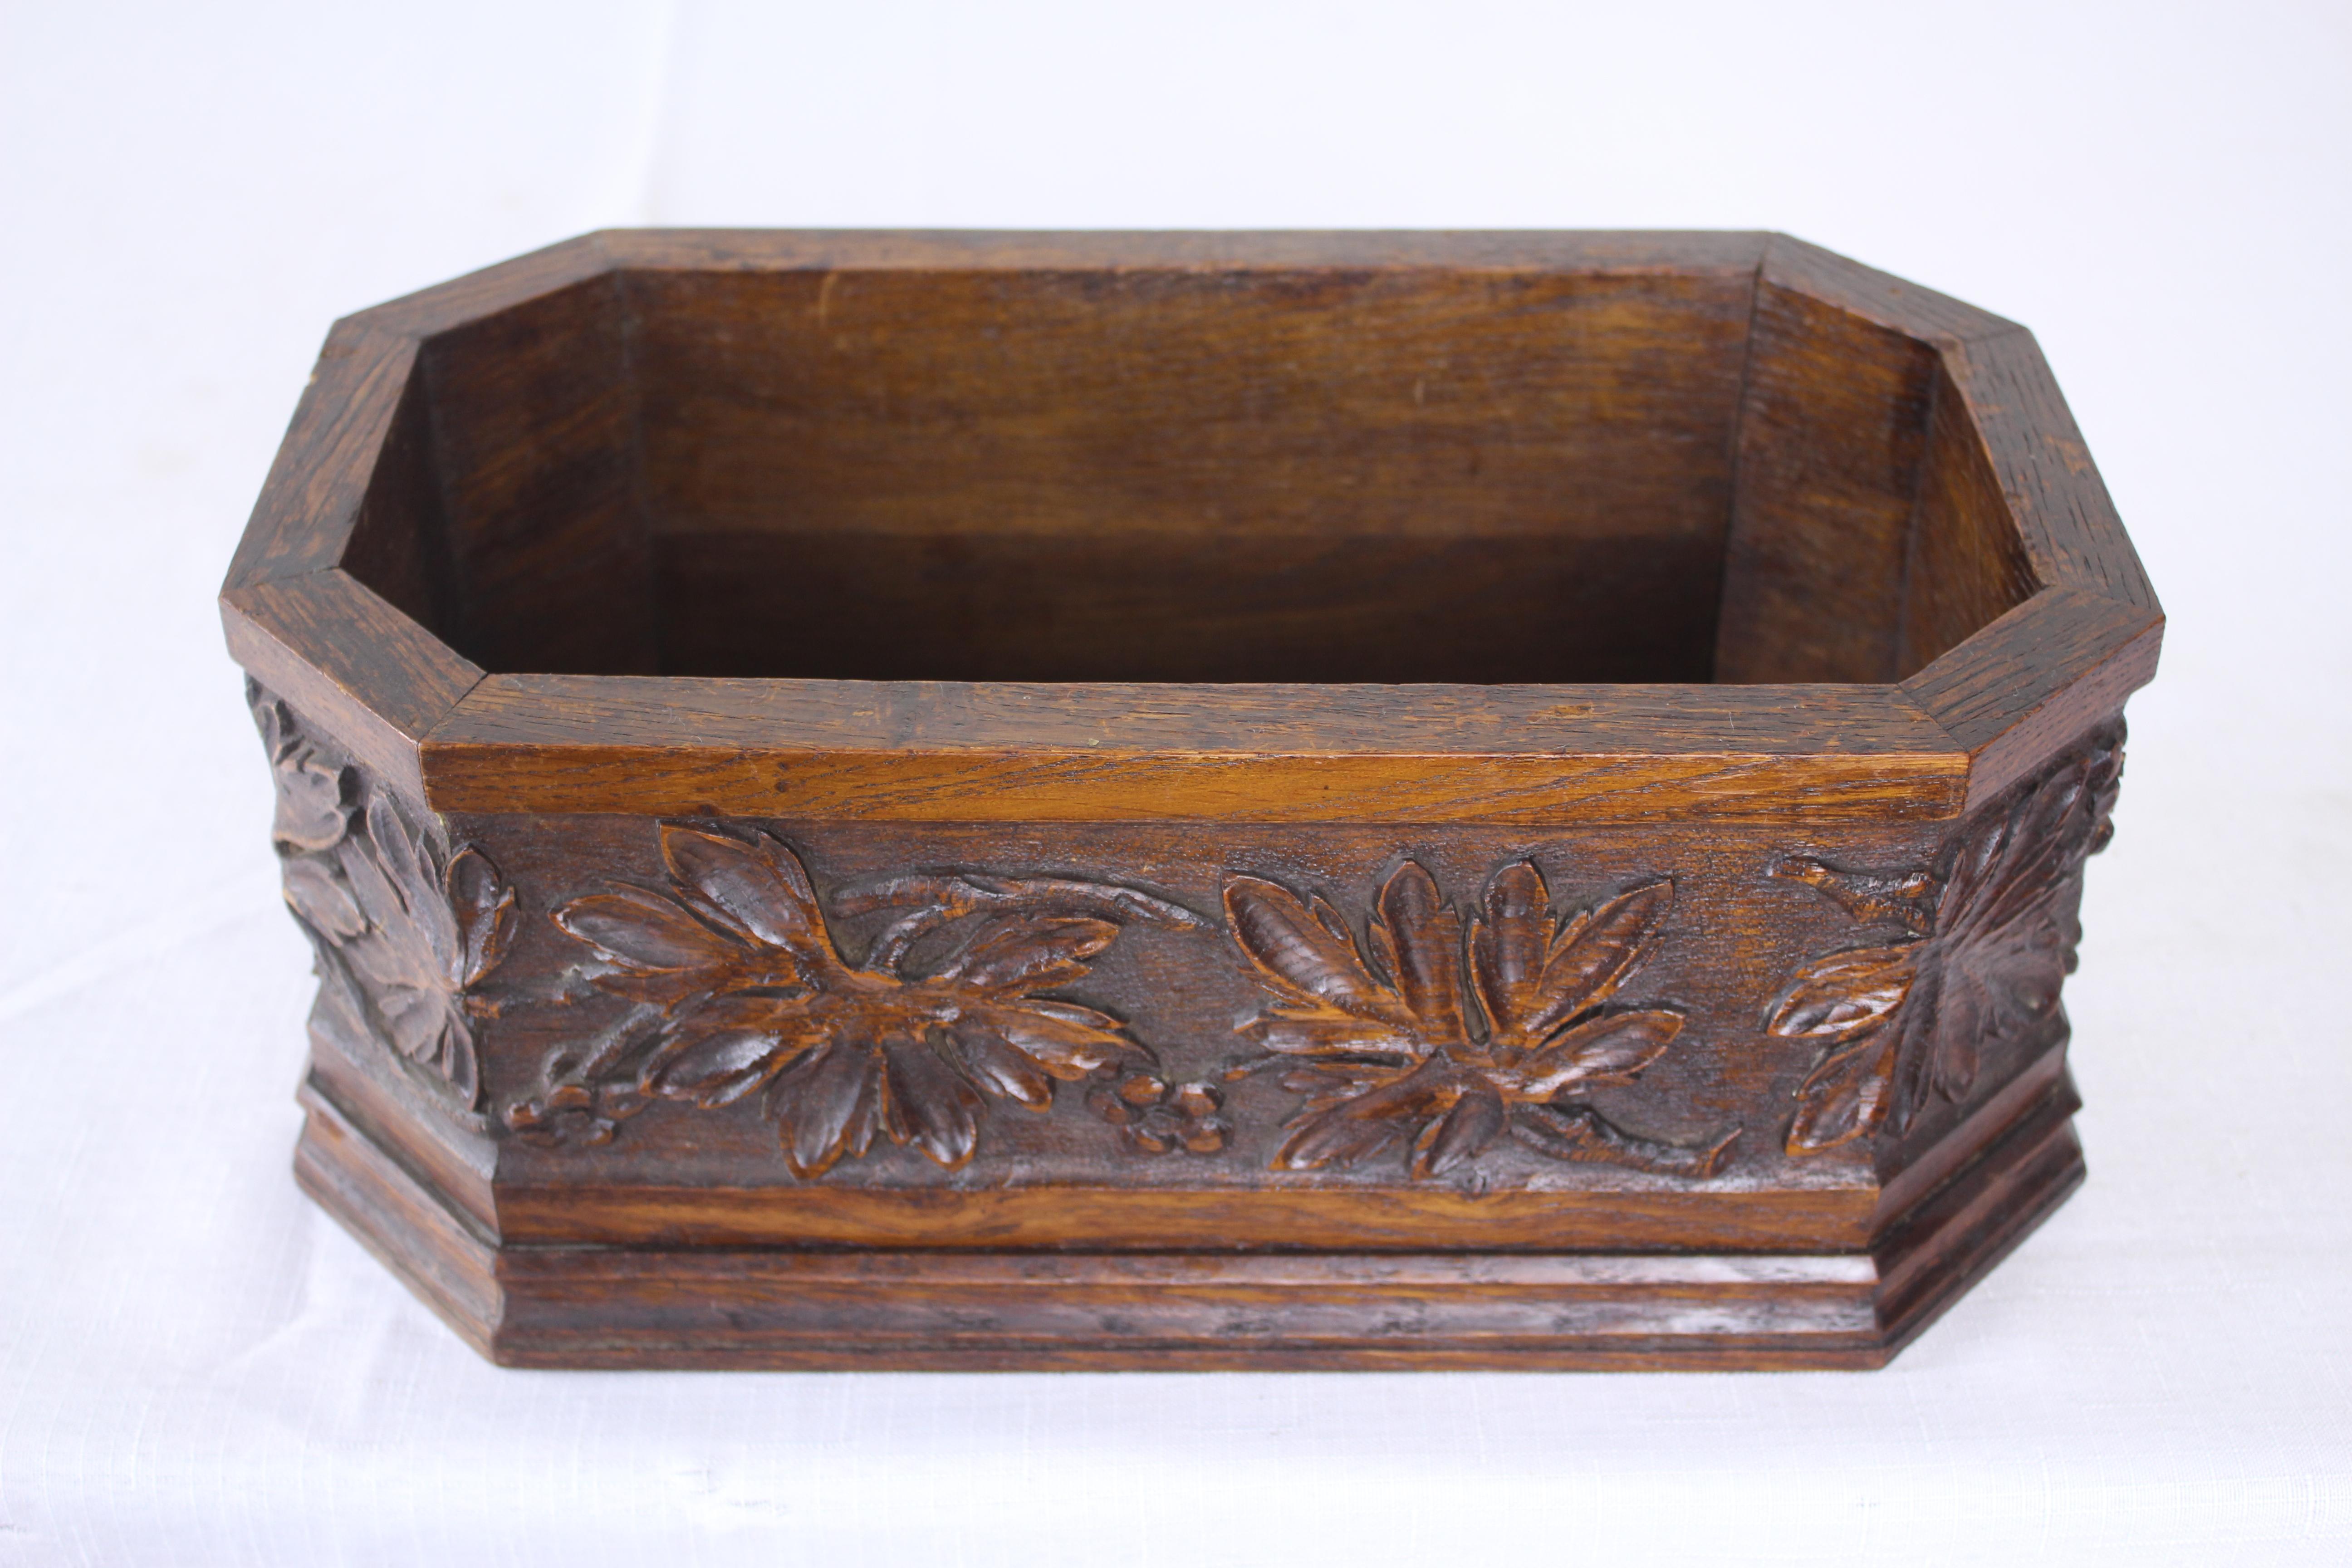 A beautifully carved Victorian carved box or planter in very good antique condtion.